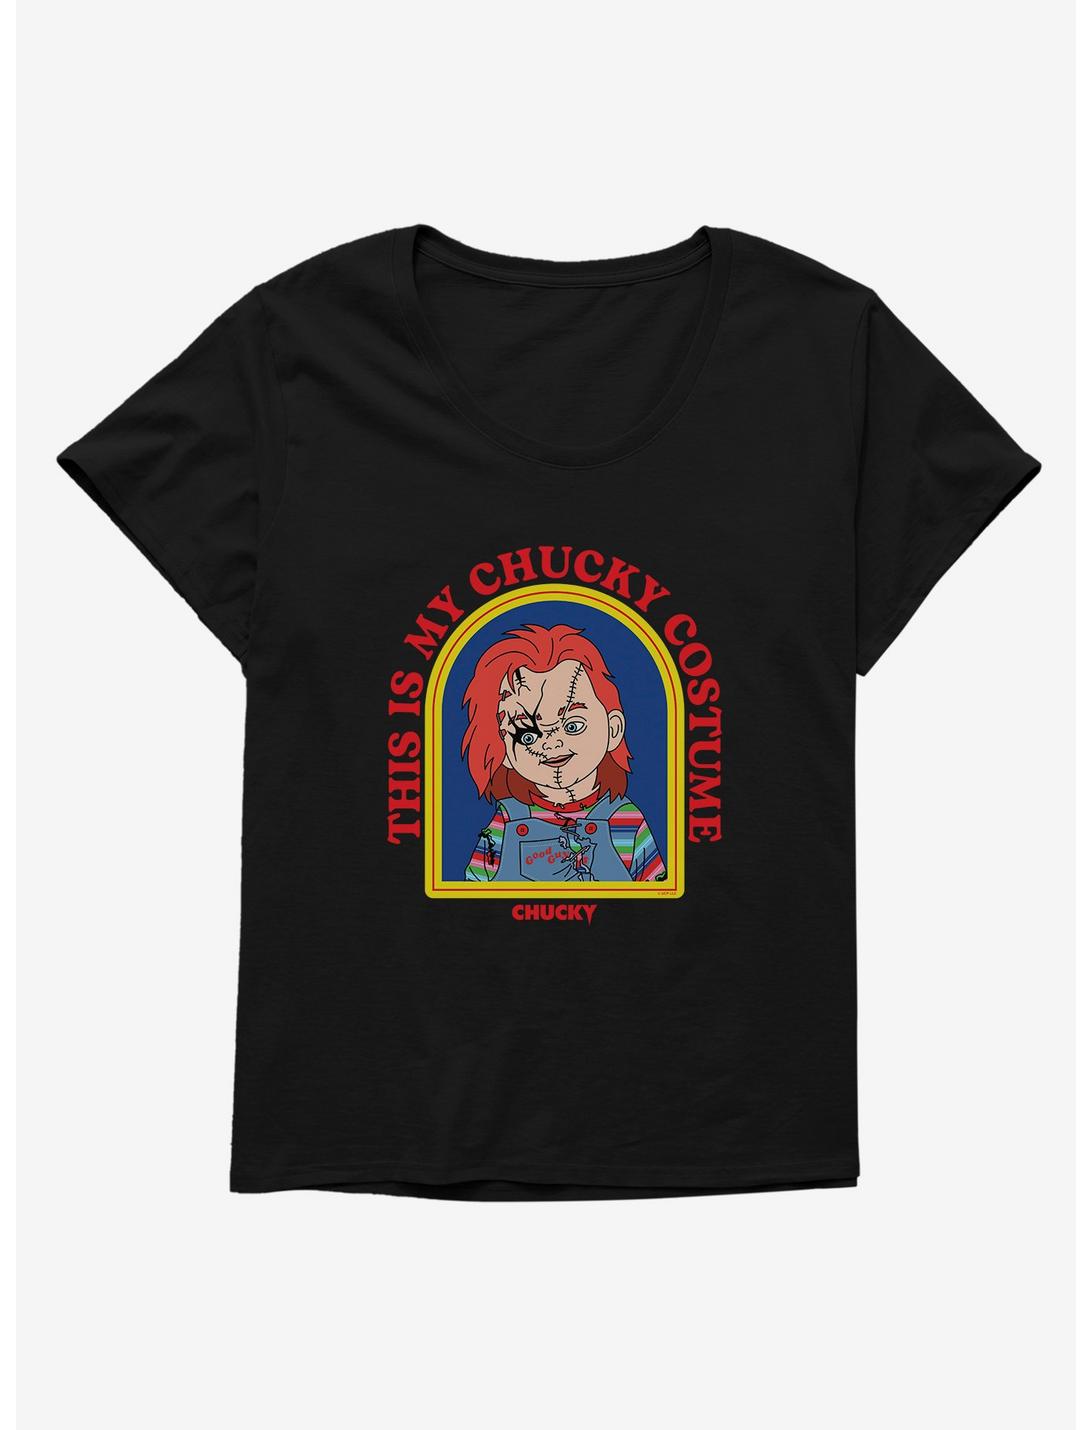 Chucky This Is My Chucky Costume Girls T-Shirt Plus Size, BLACK, hi-res